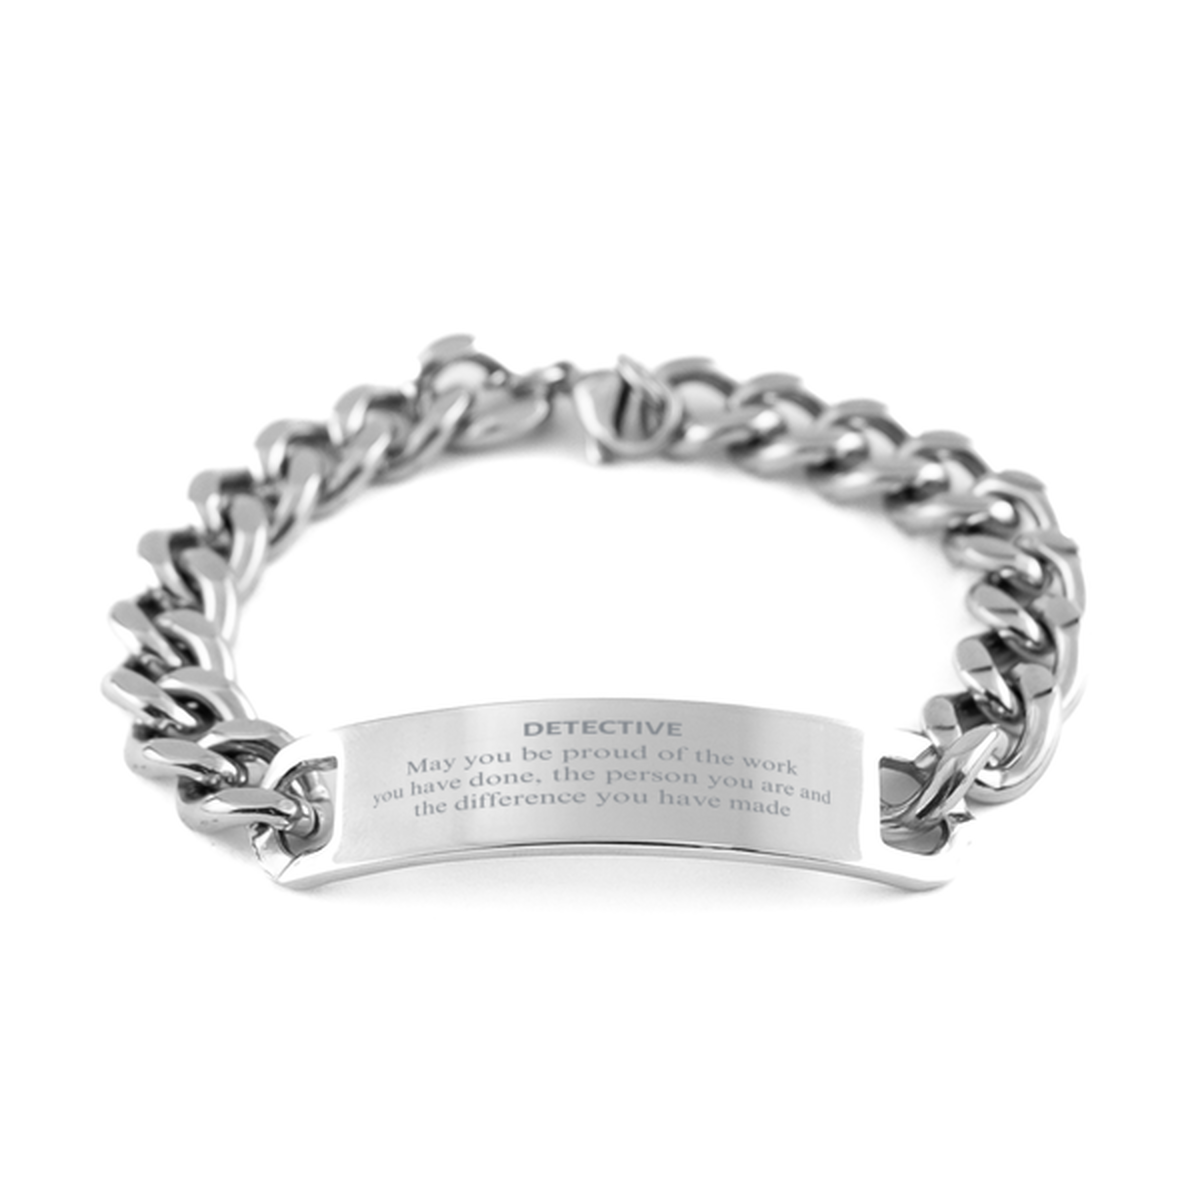 Detective May you be proud of the work you have done, Retirement Detective Cuban Chain Stainless Steel Bracelet for Colleague Appreciation Gifts Amazing for Detective